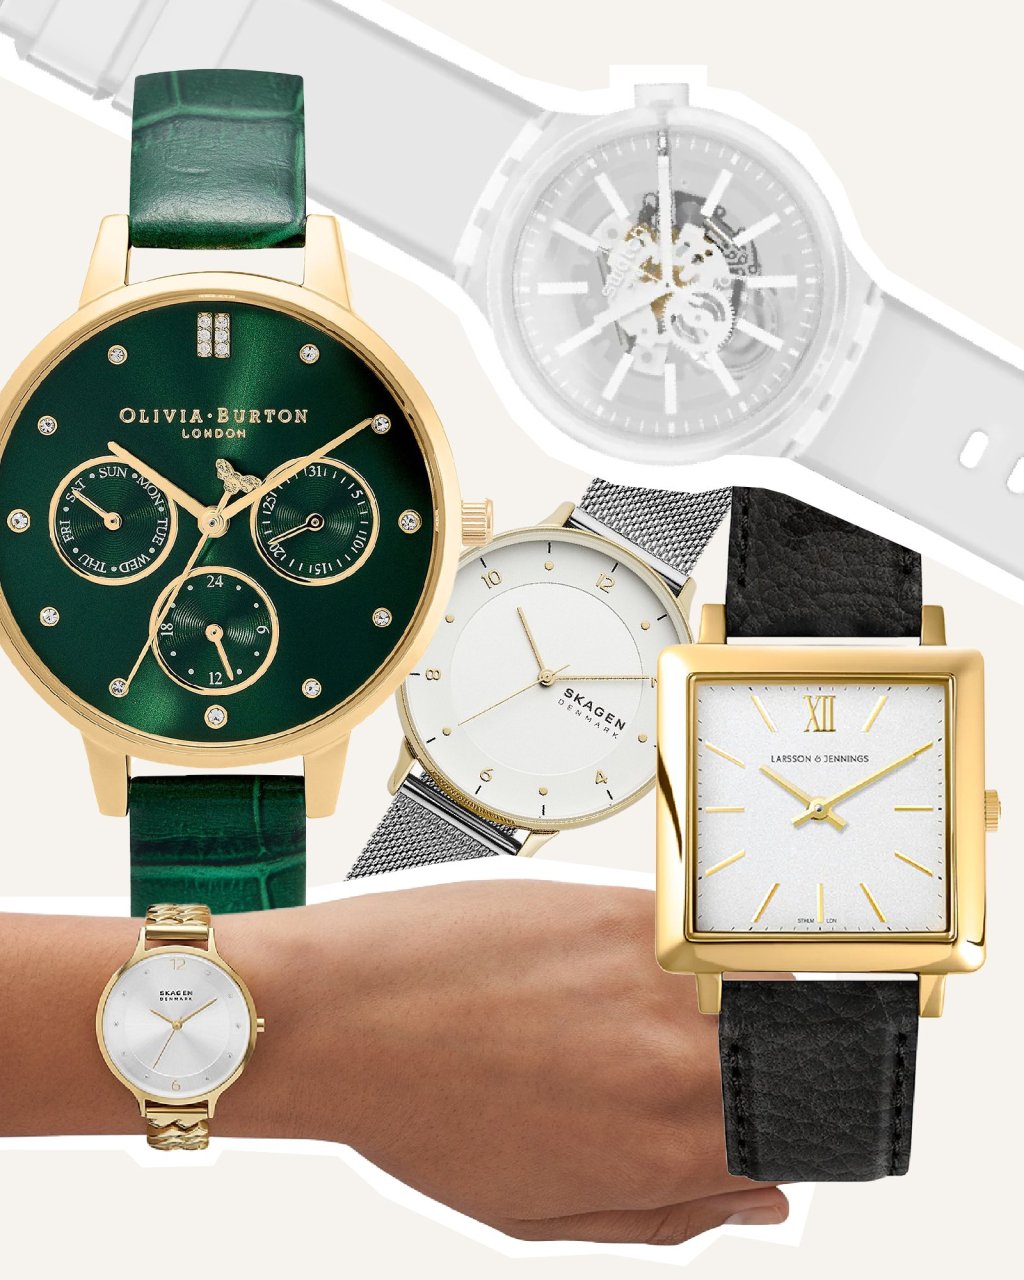 20 Most Popular Watches of 2023: Top Luxury Watch Brands to Know – Barton  Watch Bands